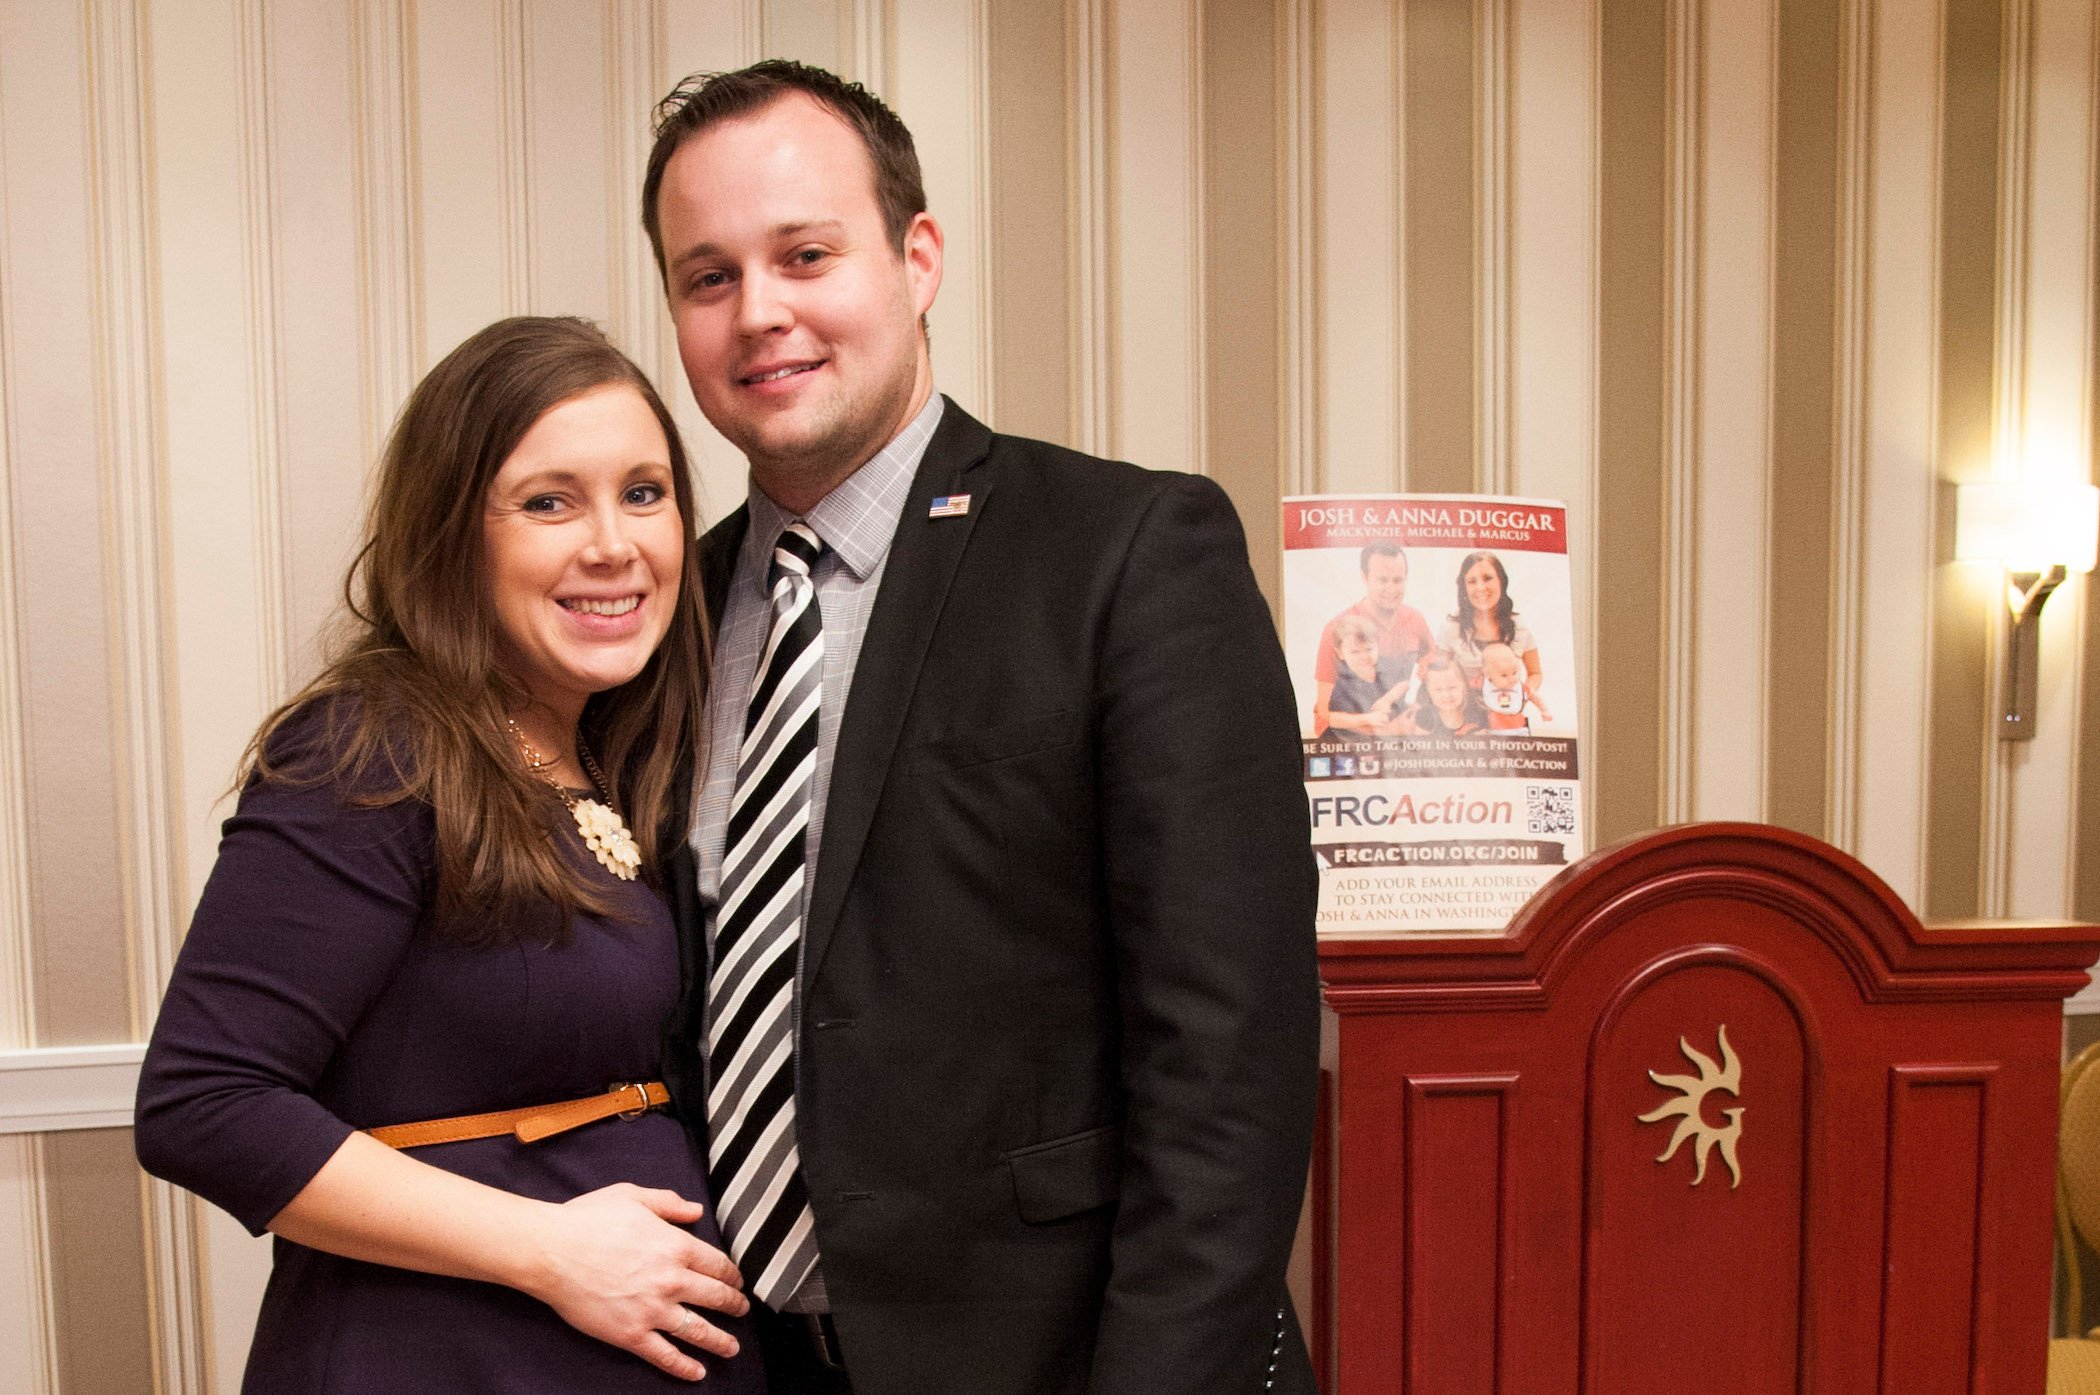 Josh Duggar and Anna Duggar standing together and smiling